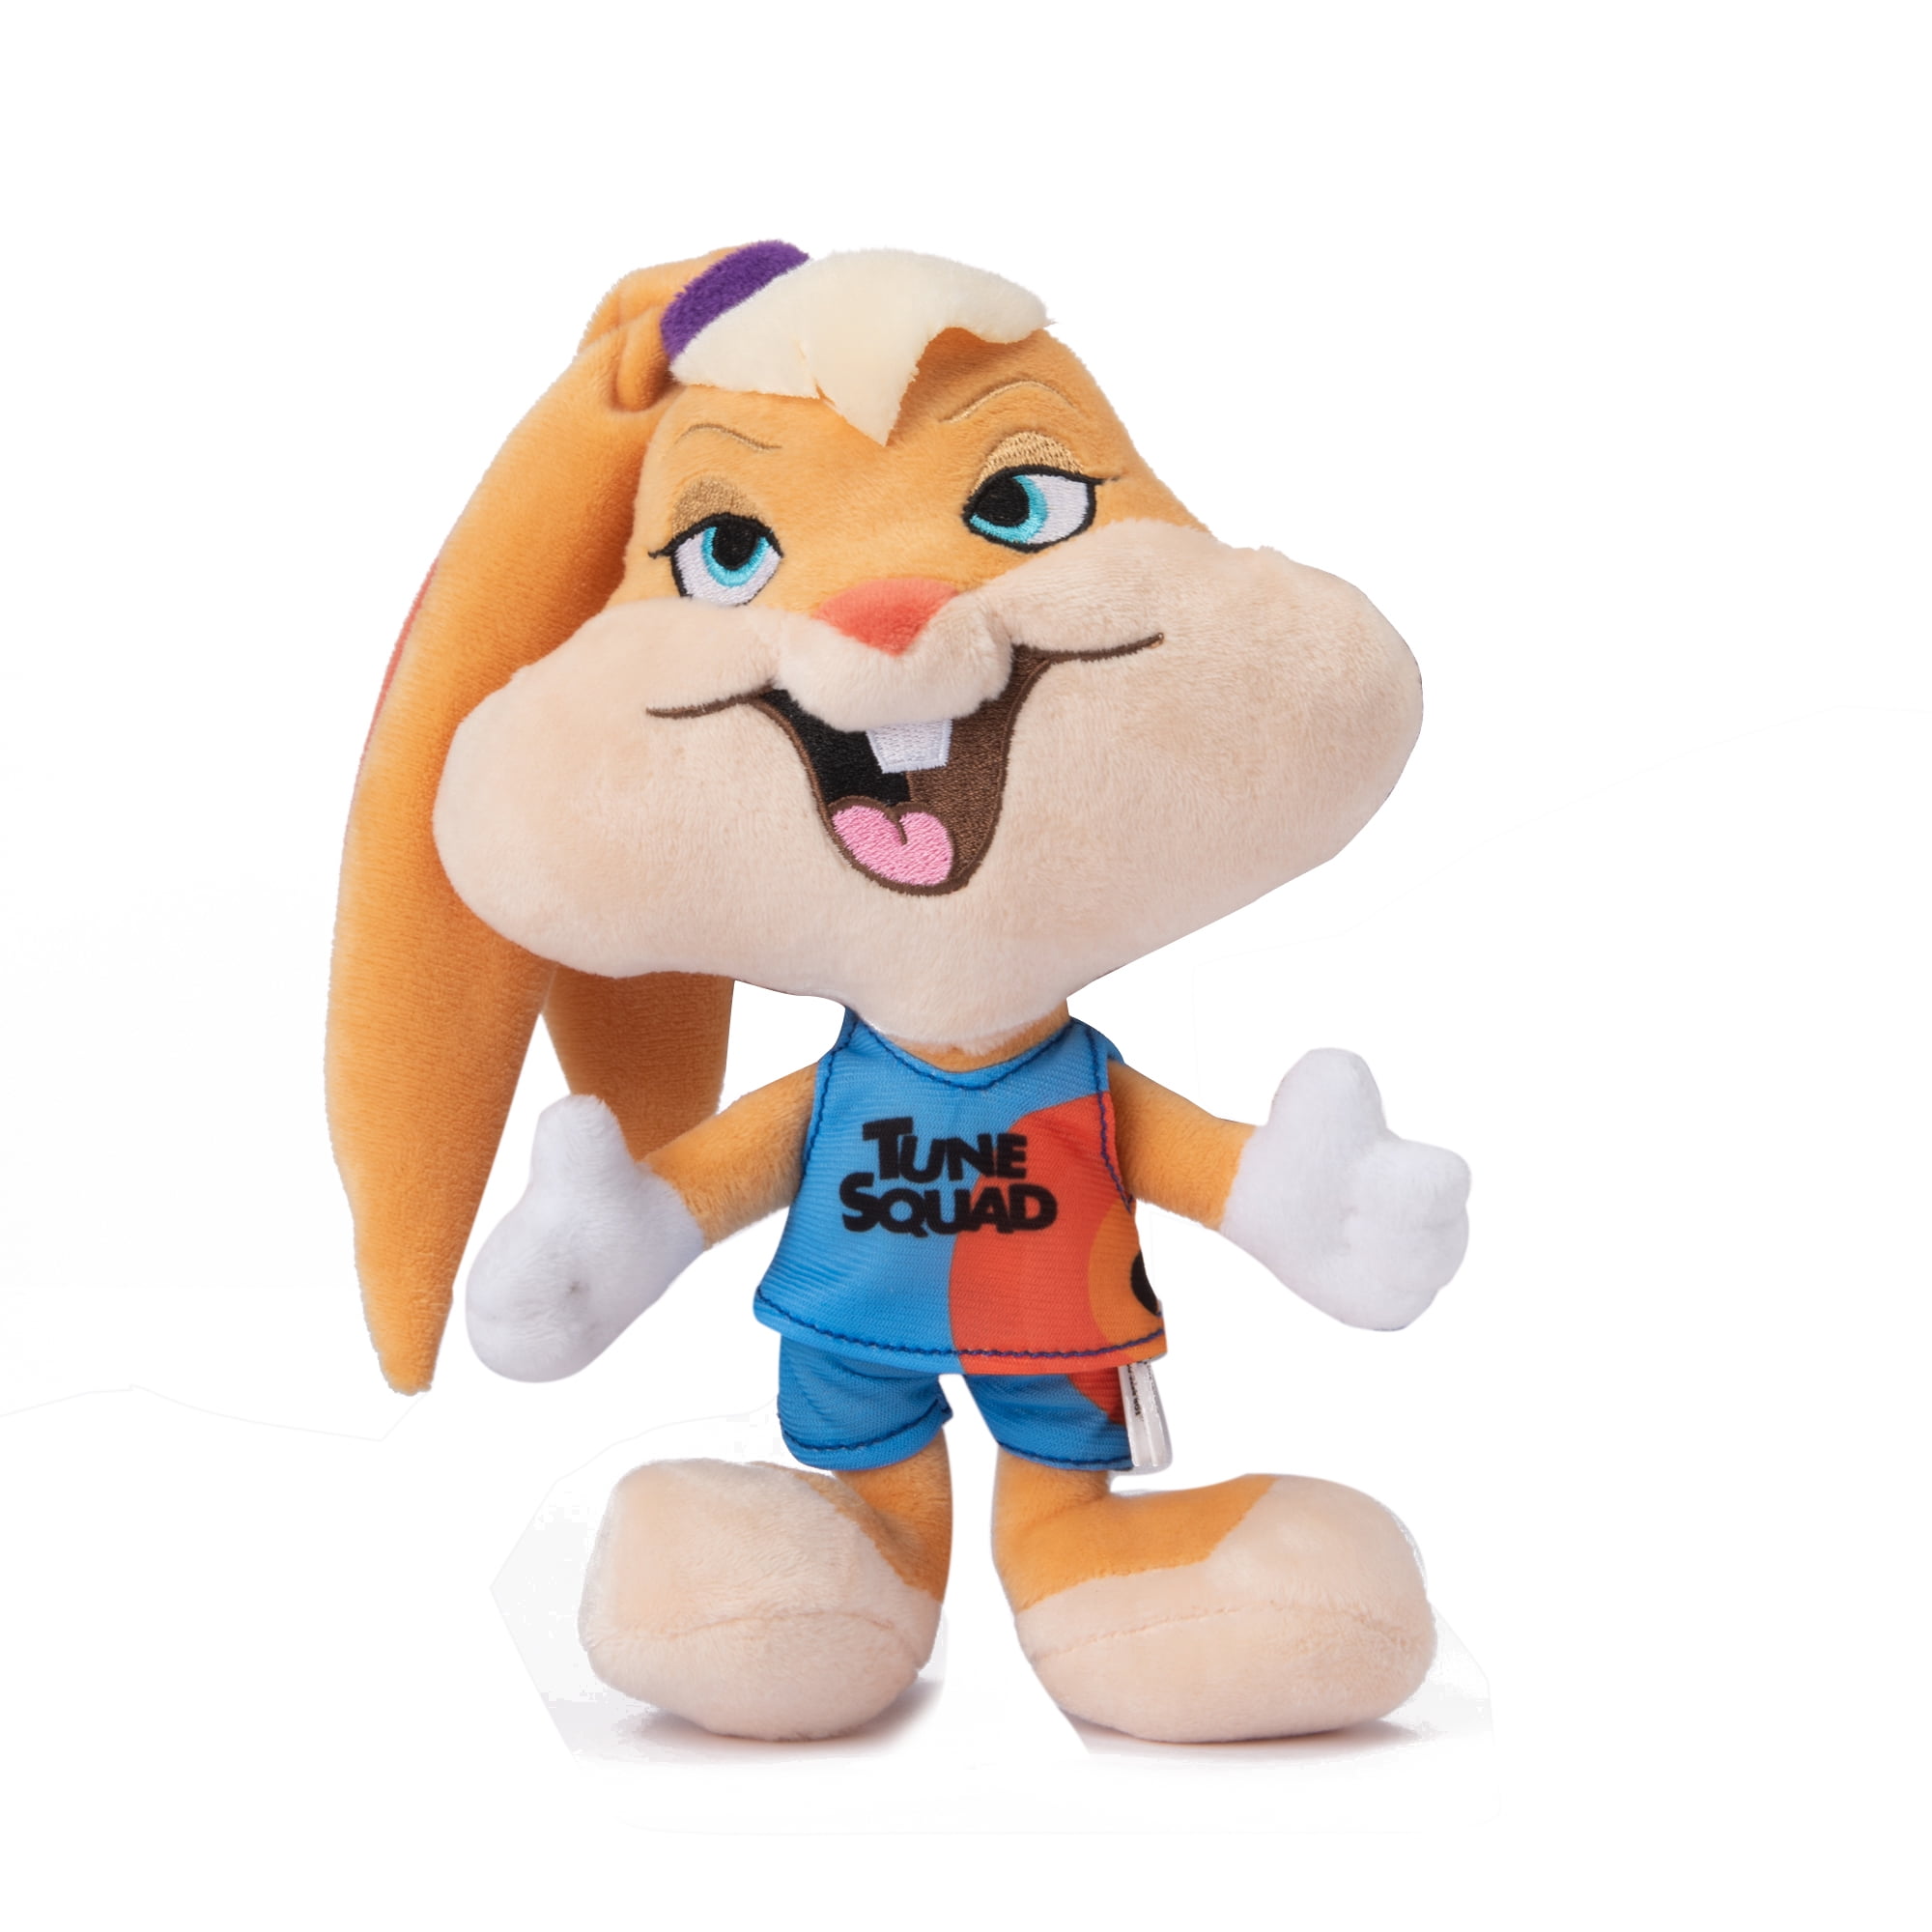 Bugs Bunny Looney Tunes Tune Squad Space Jam Plush 12Inch Soft Toy Brand New 